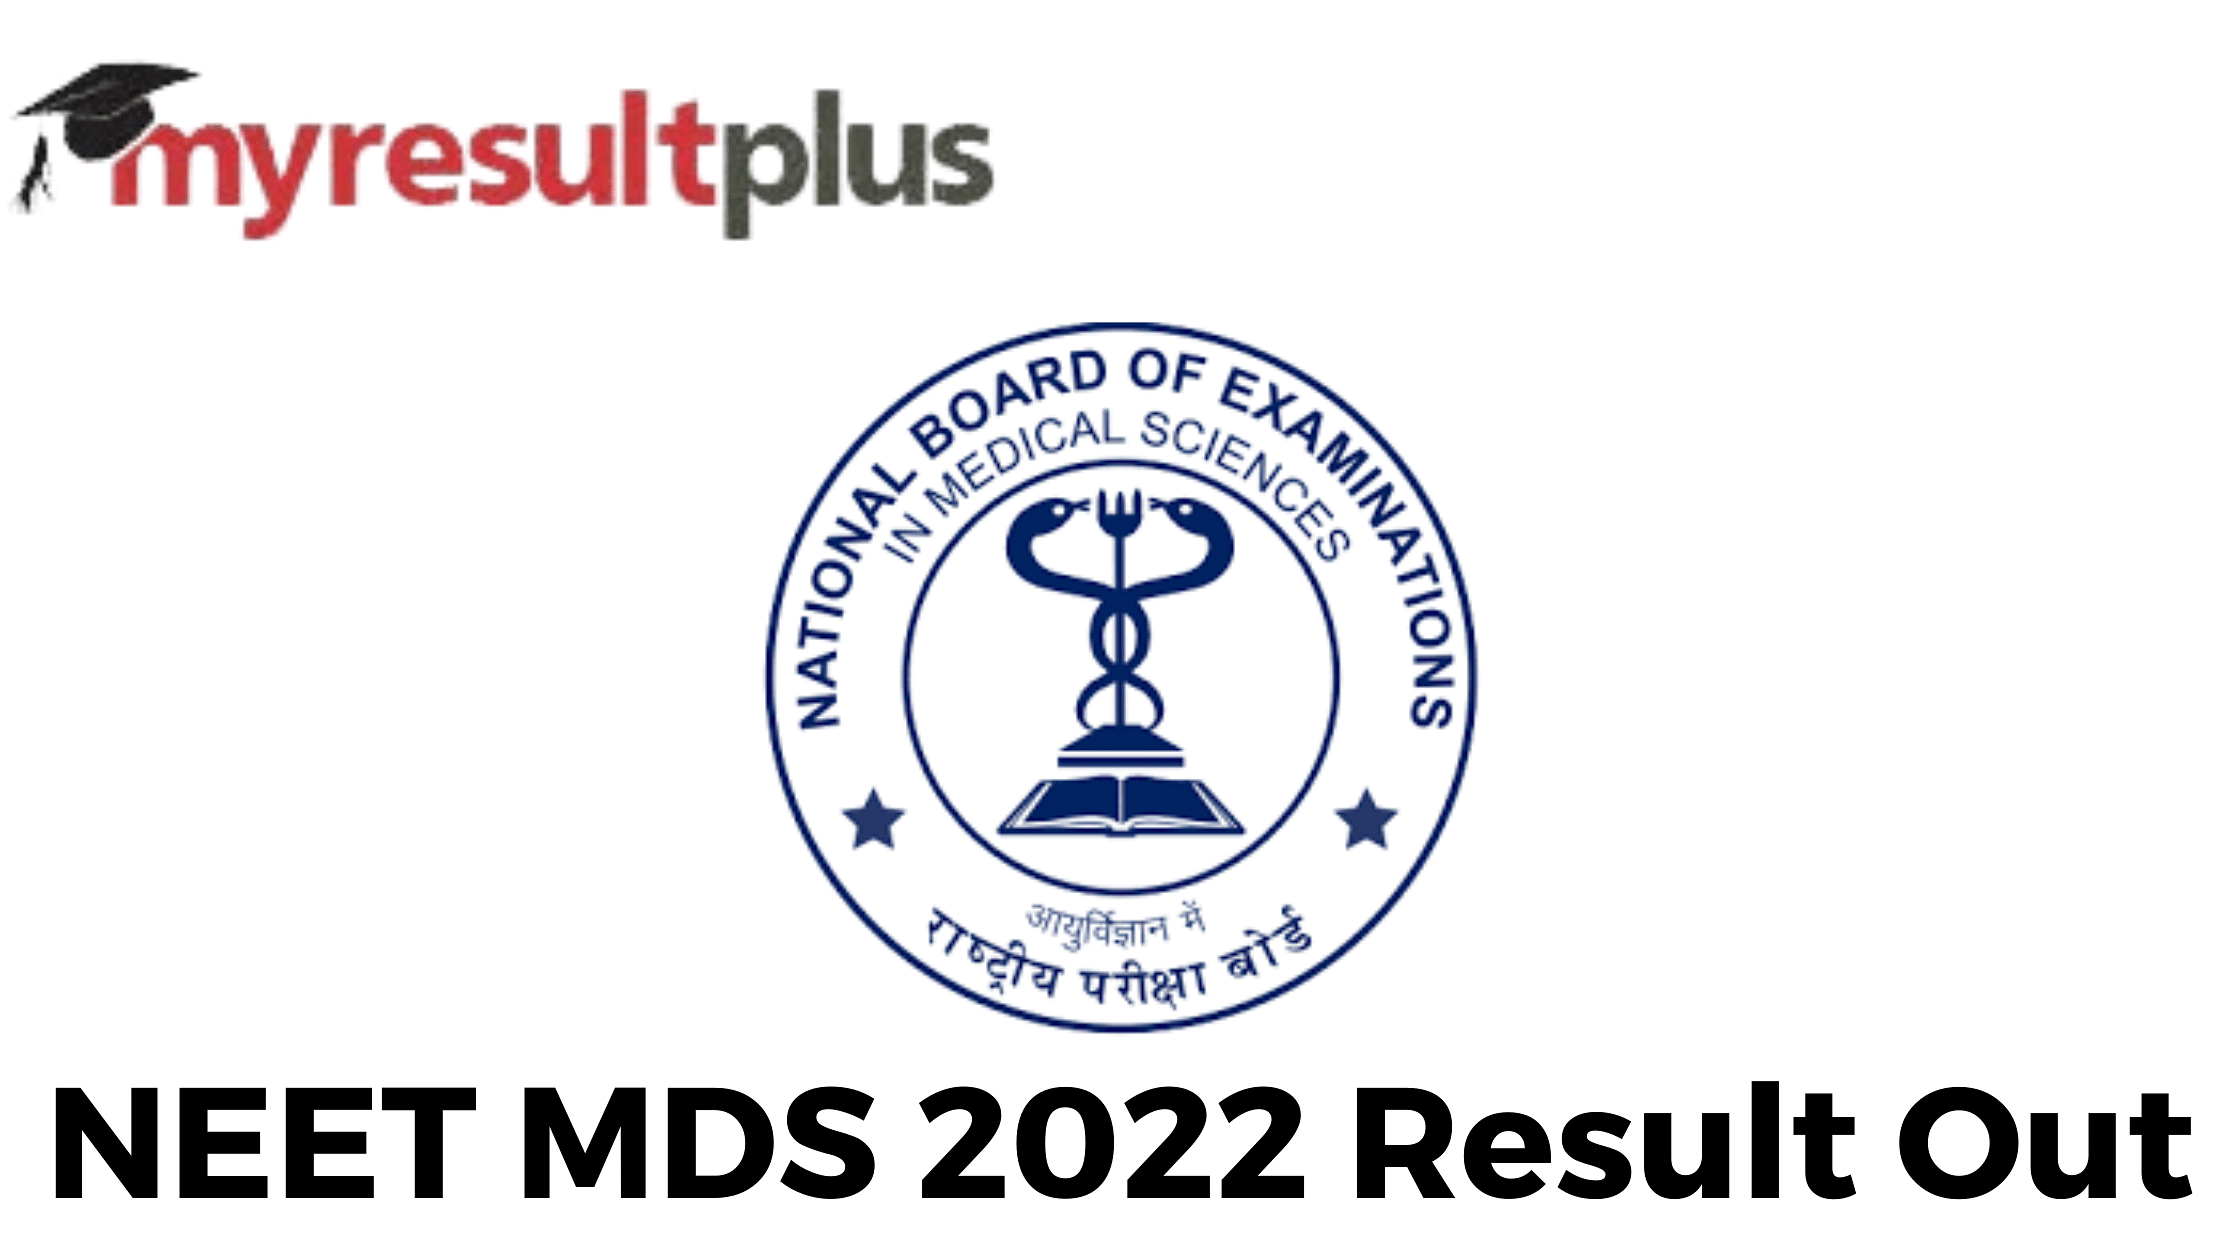 NEET MDS 2022: Merit List Out For AIQ Seats, Here's Direct Link to Check